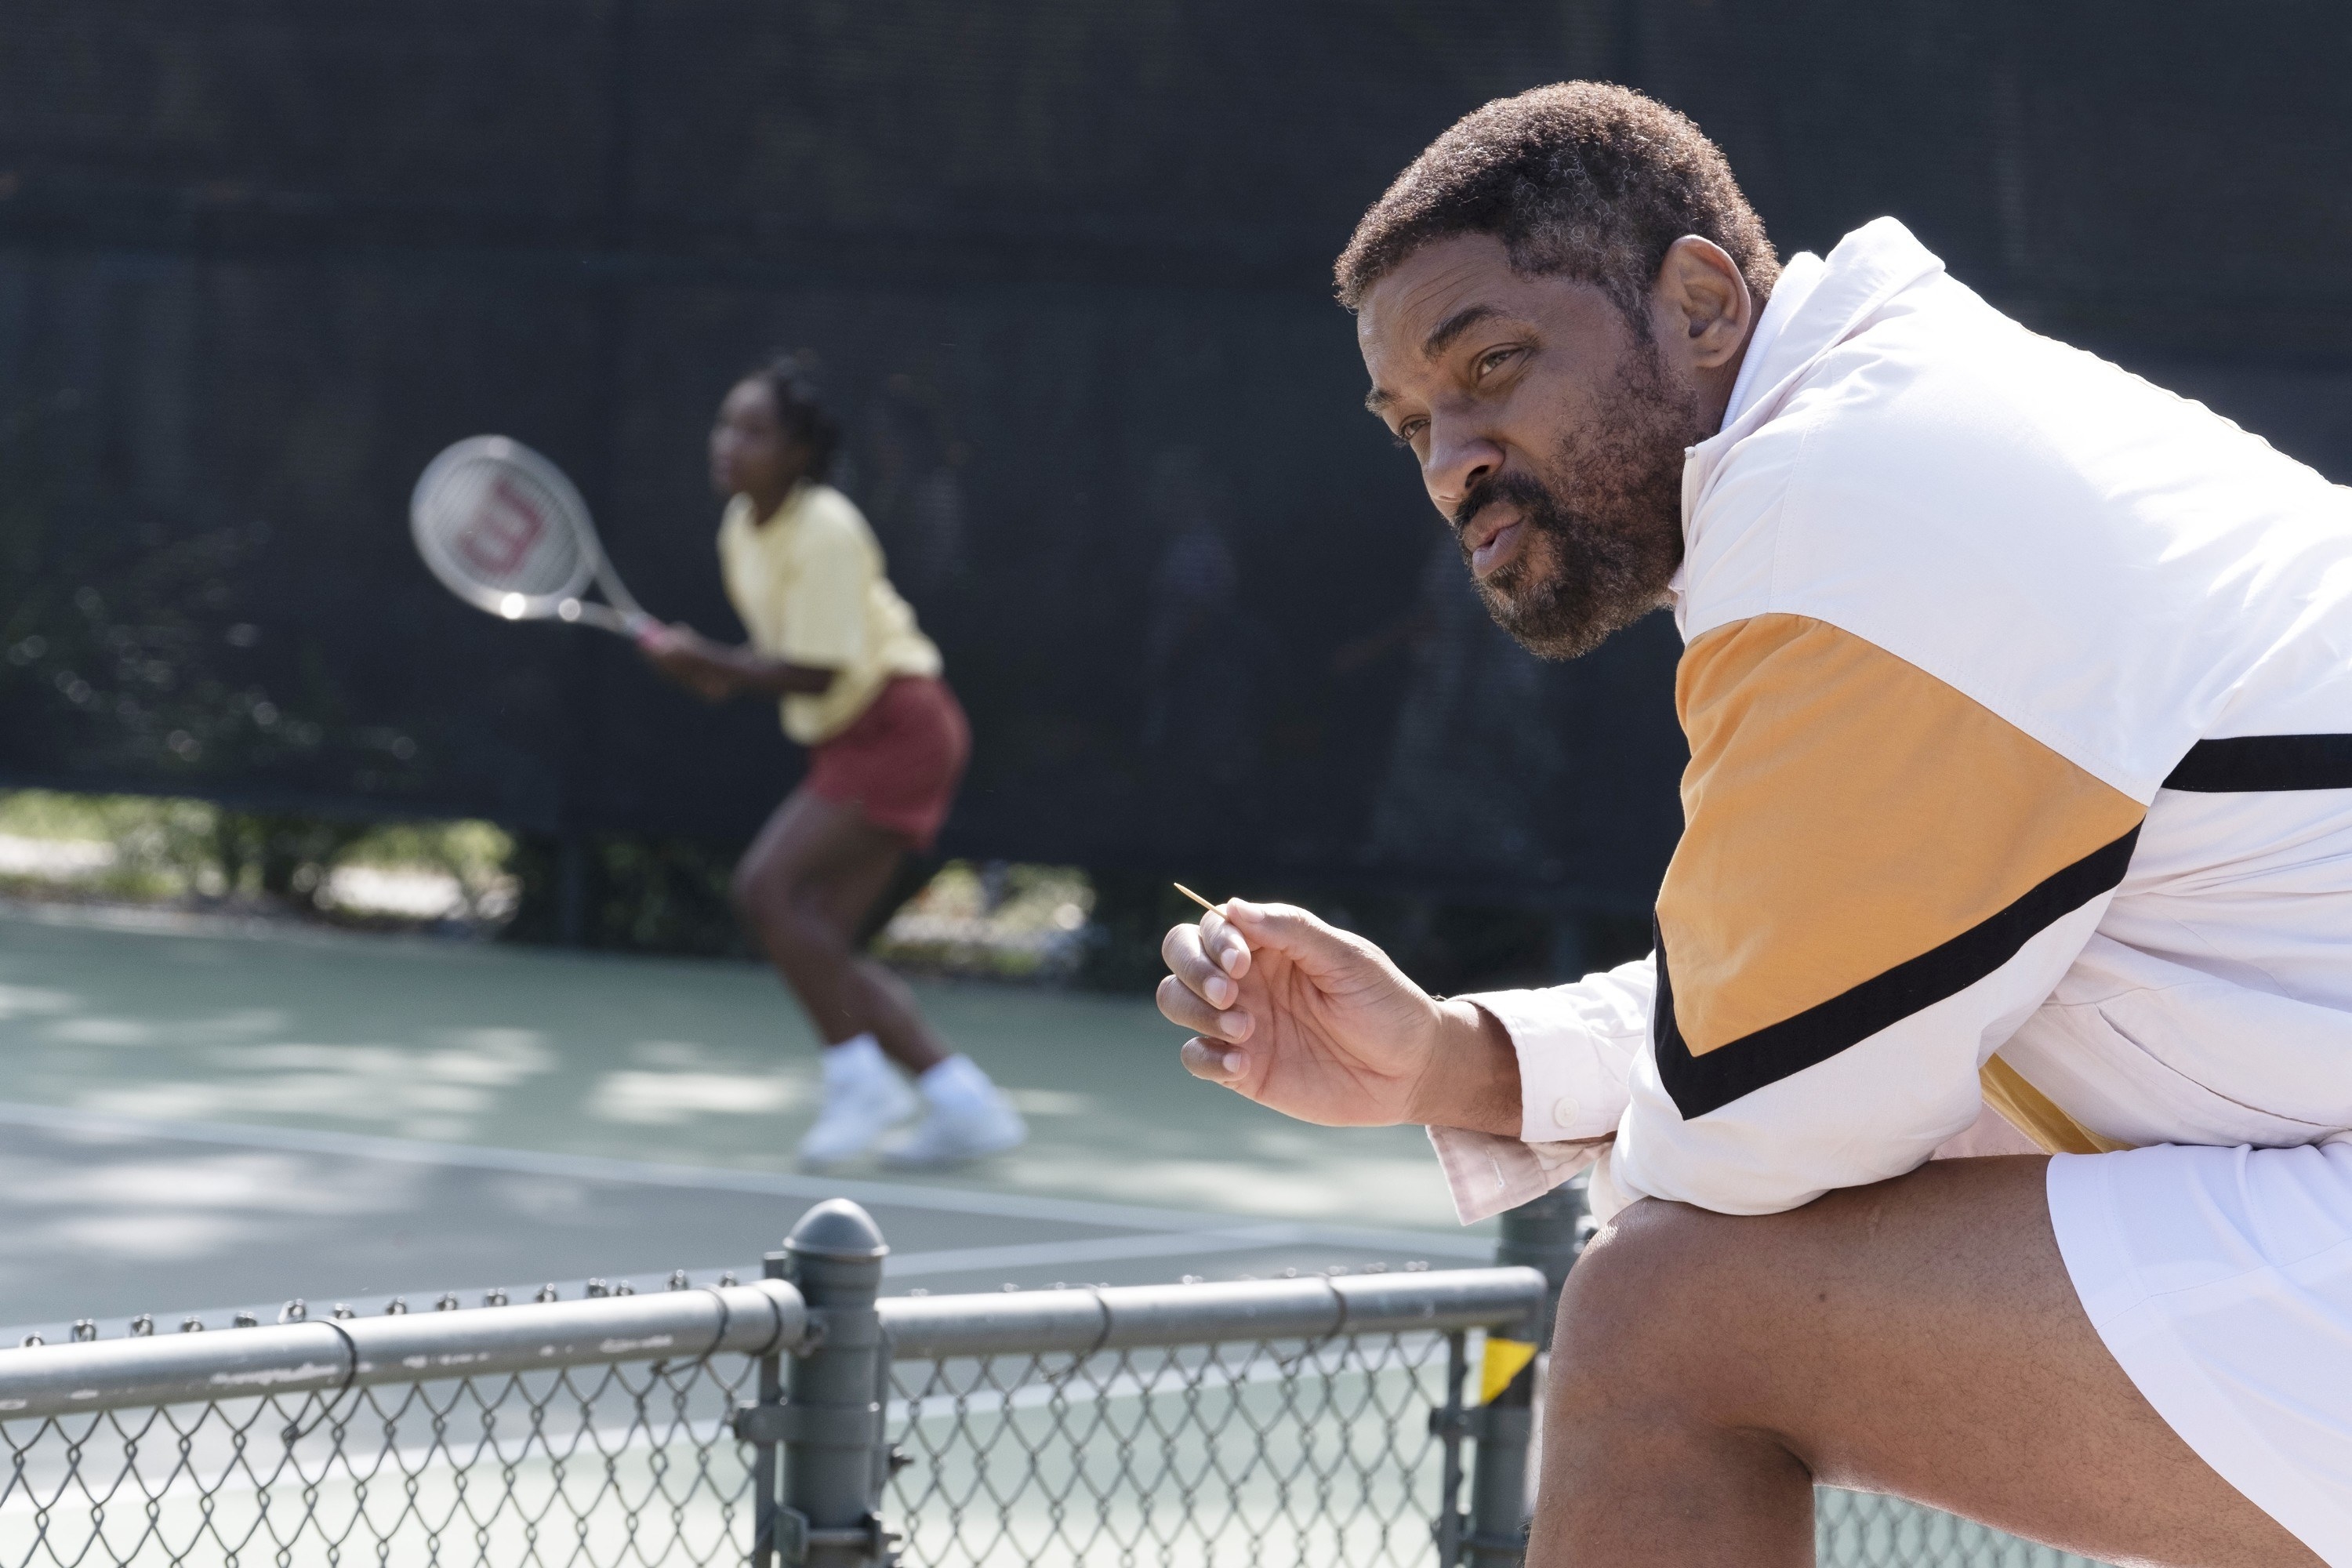 Will Smith watches his daughters play tennis